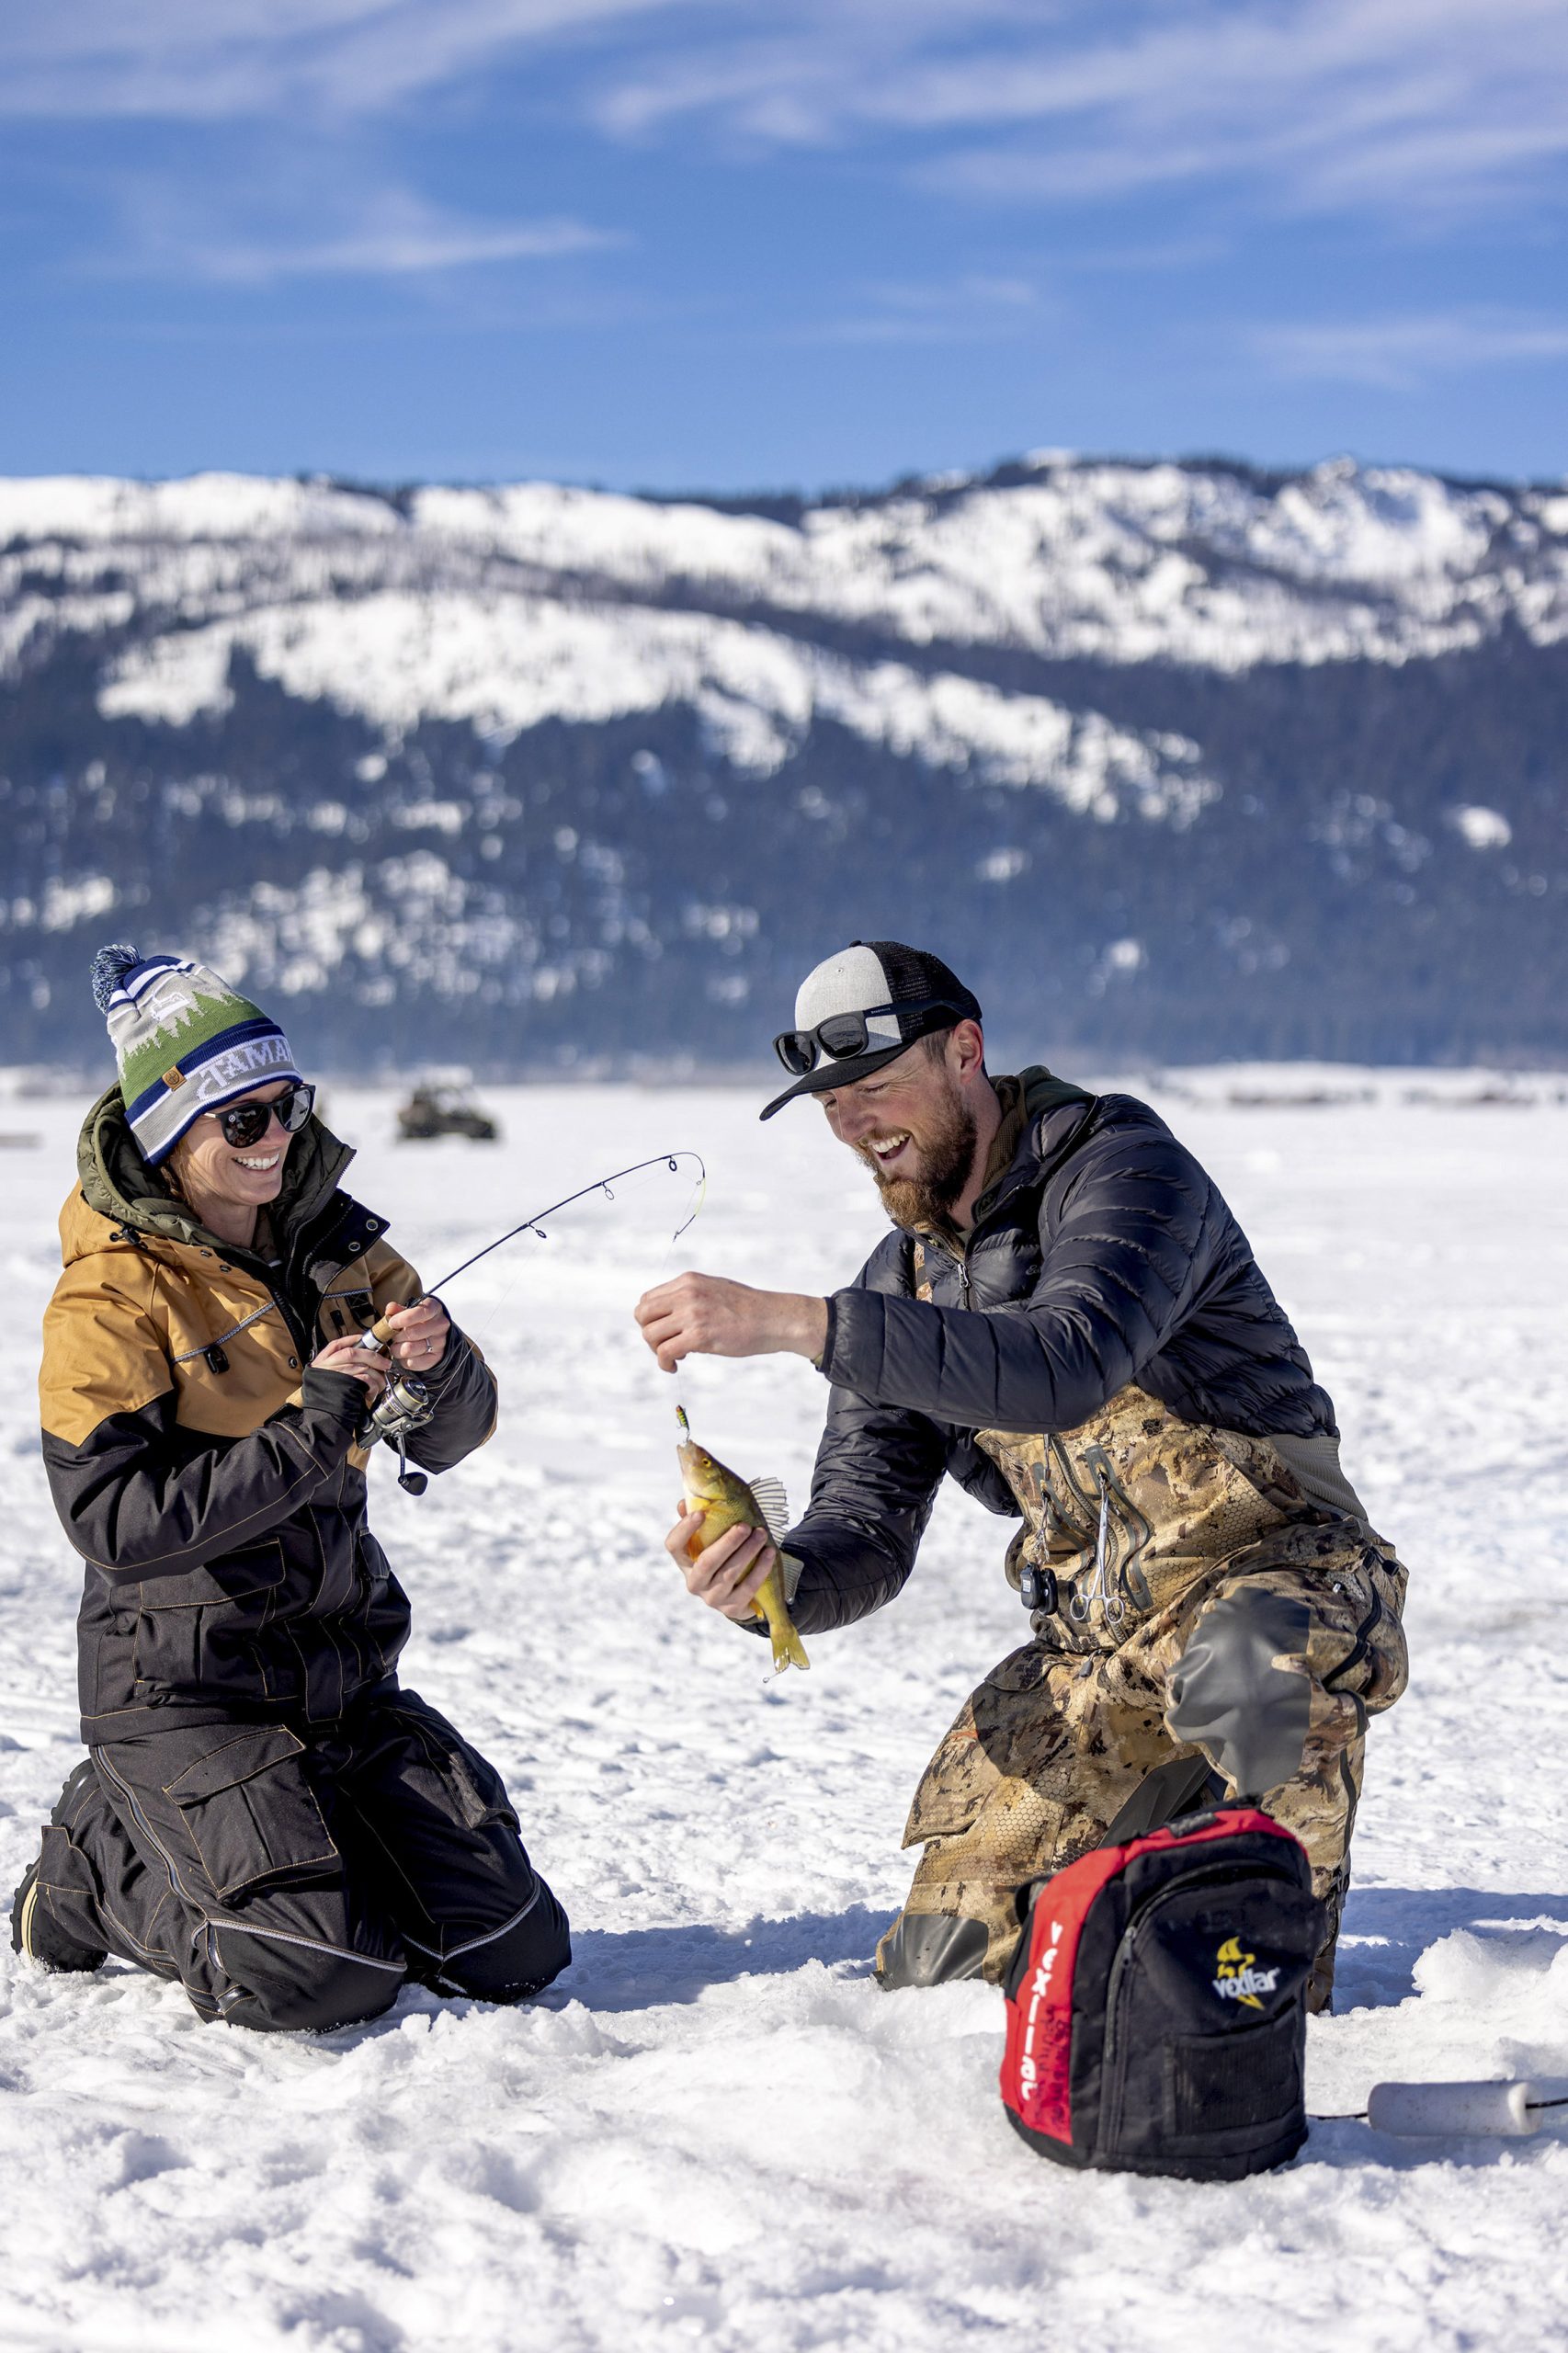 Learn Something New: Ice Fishing - McCall Idaho, Let's Go!